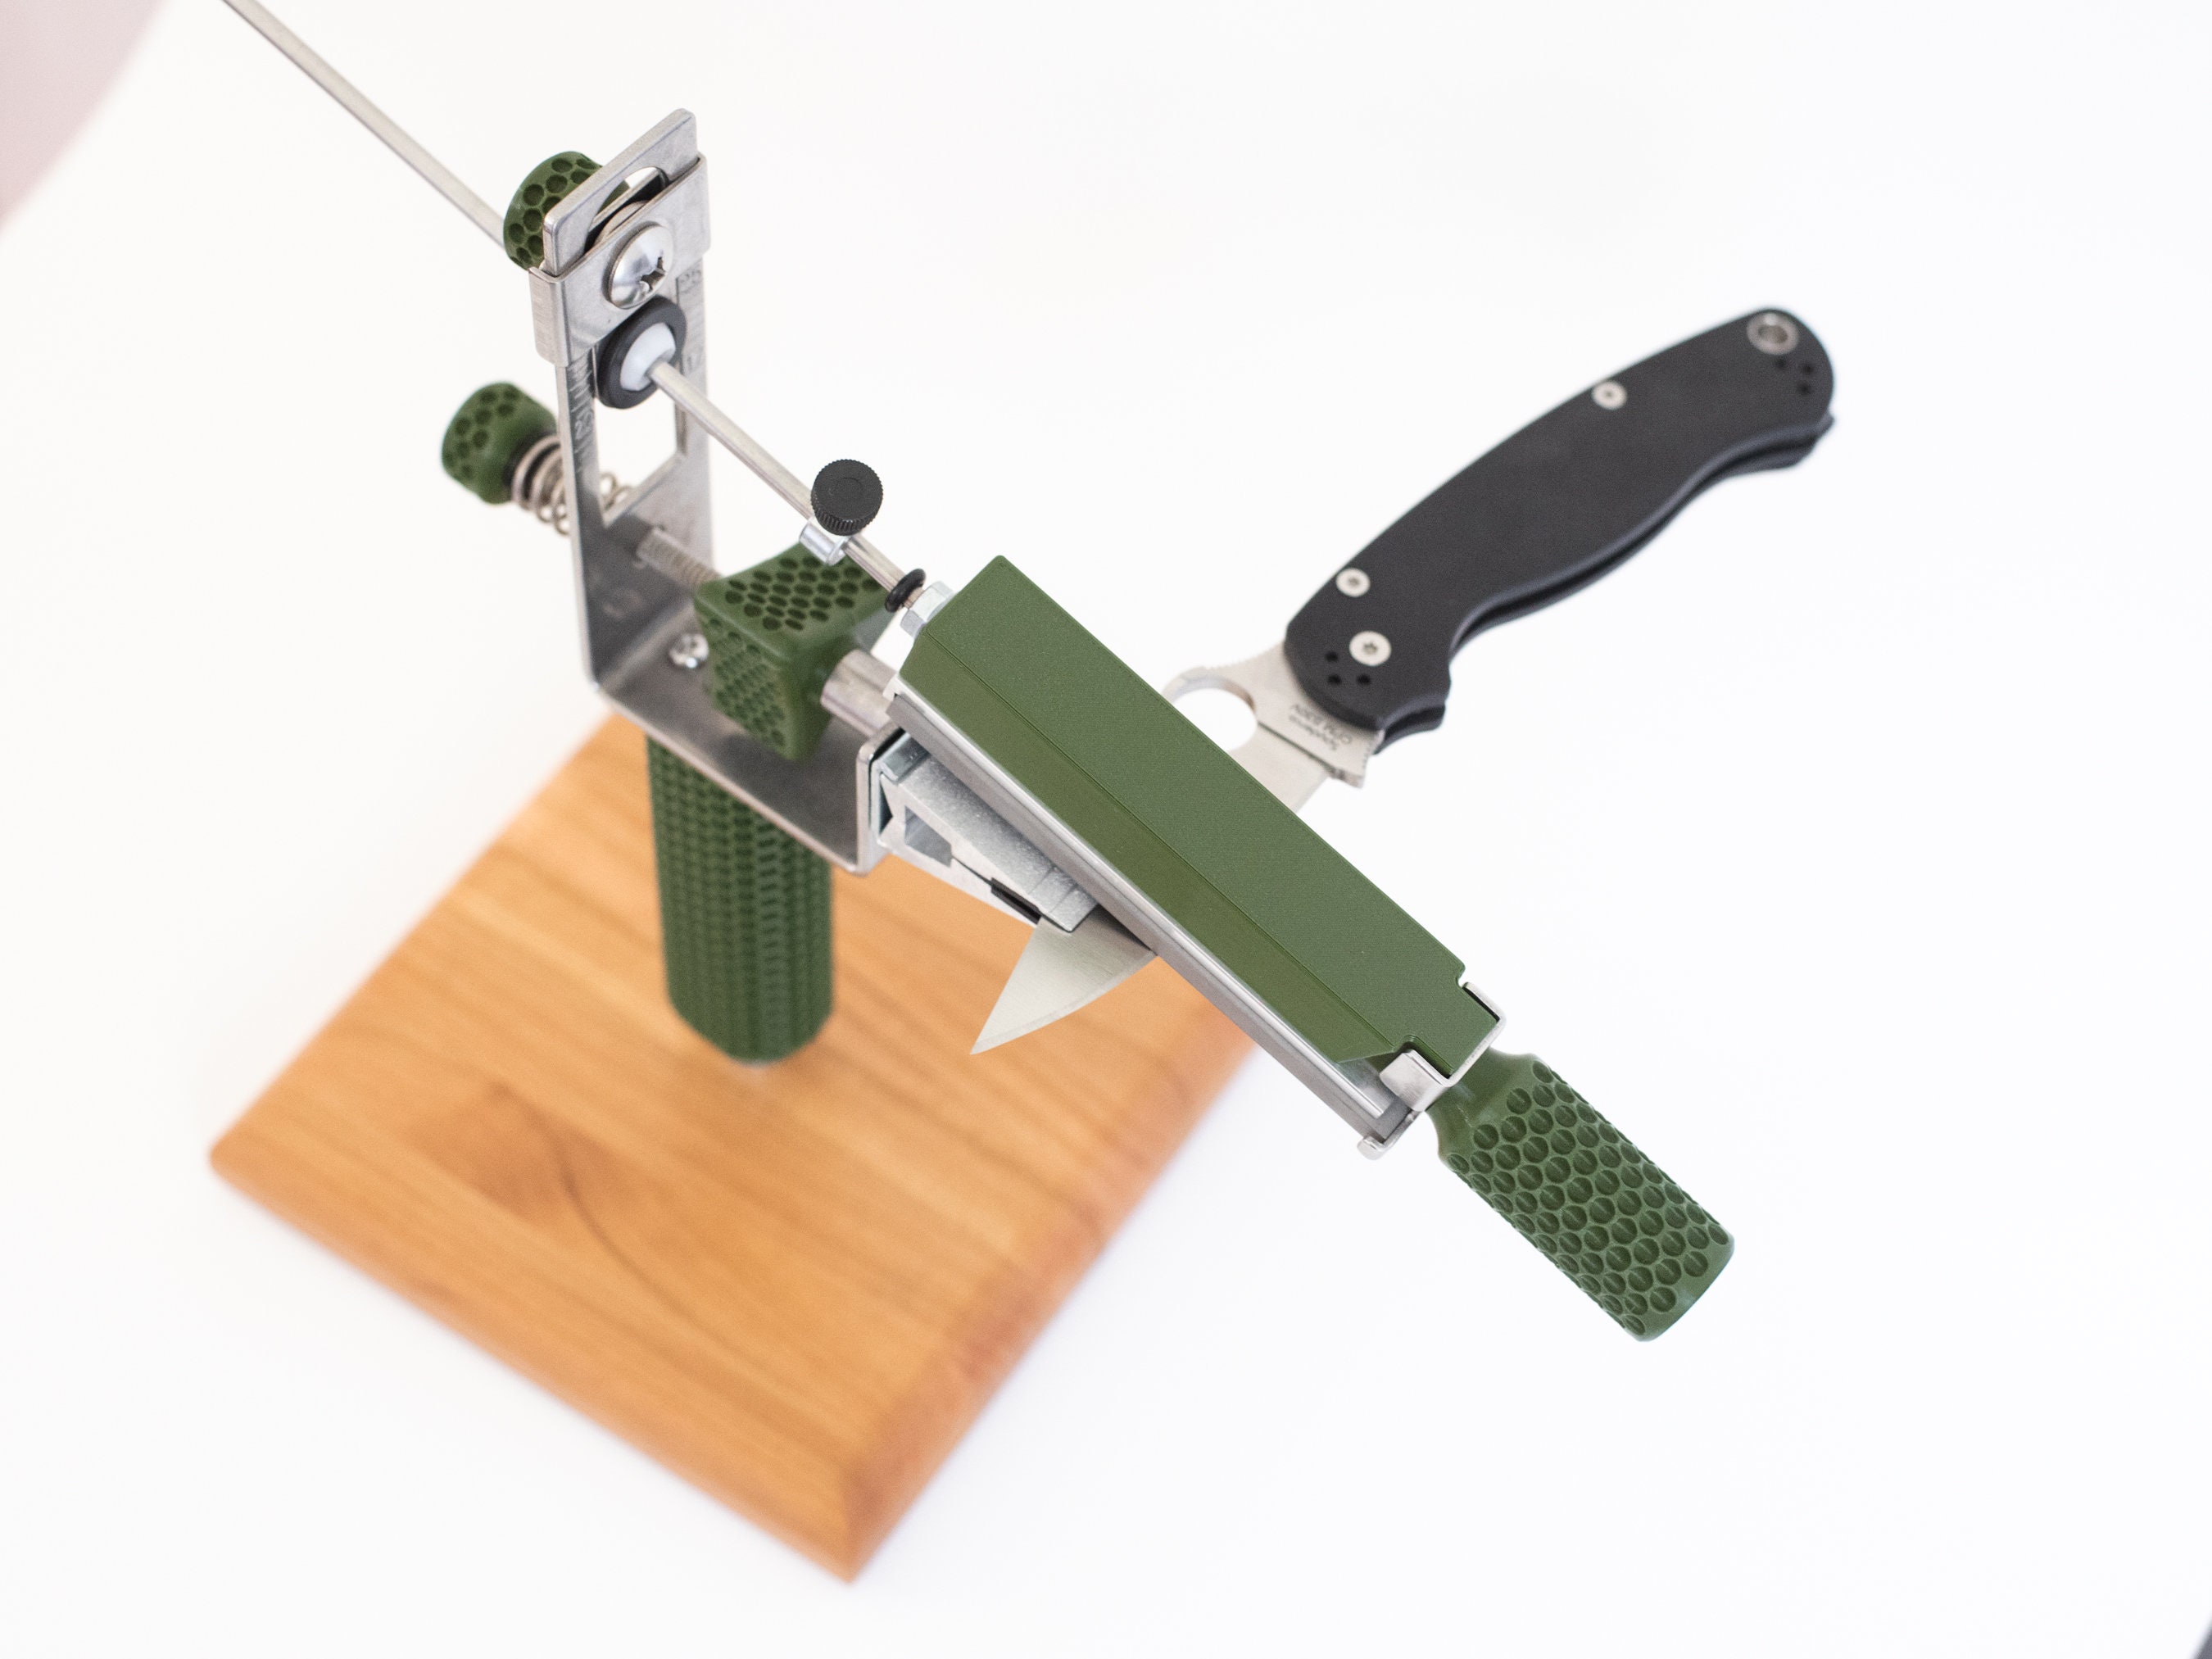 KME Sharpeners sharpening systems or accessories